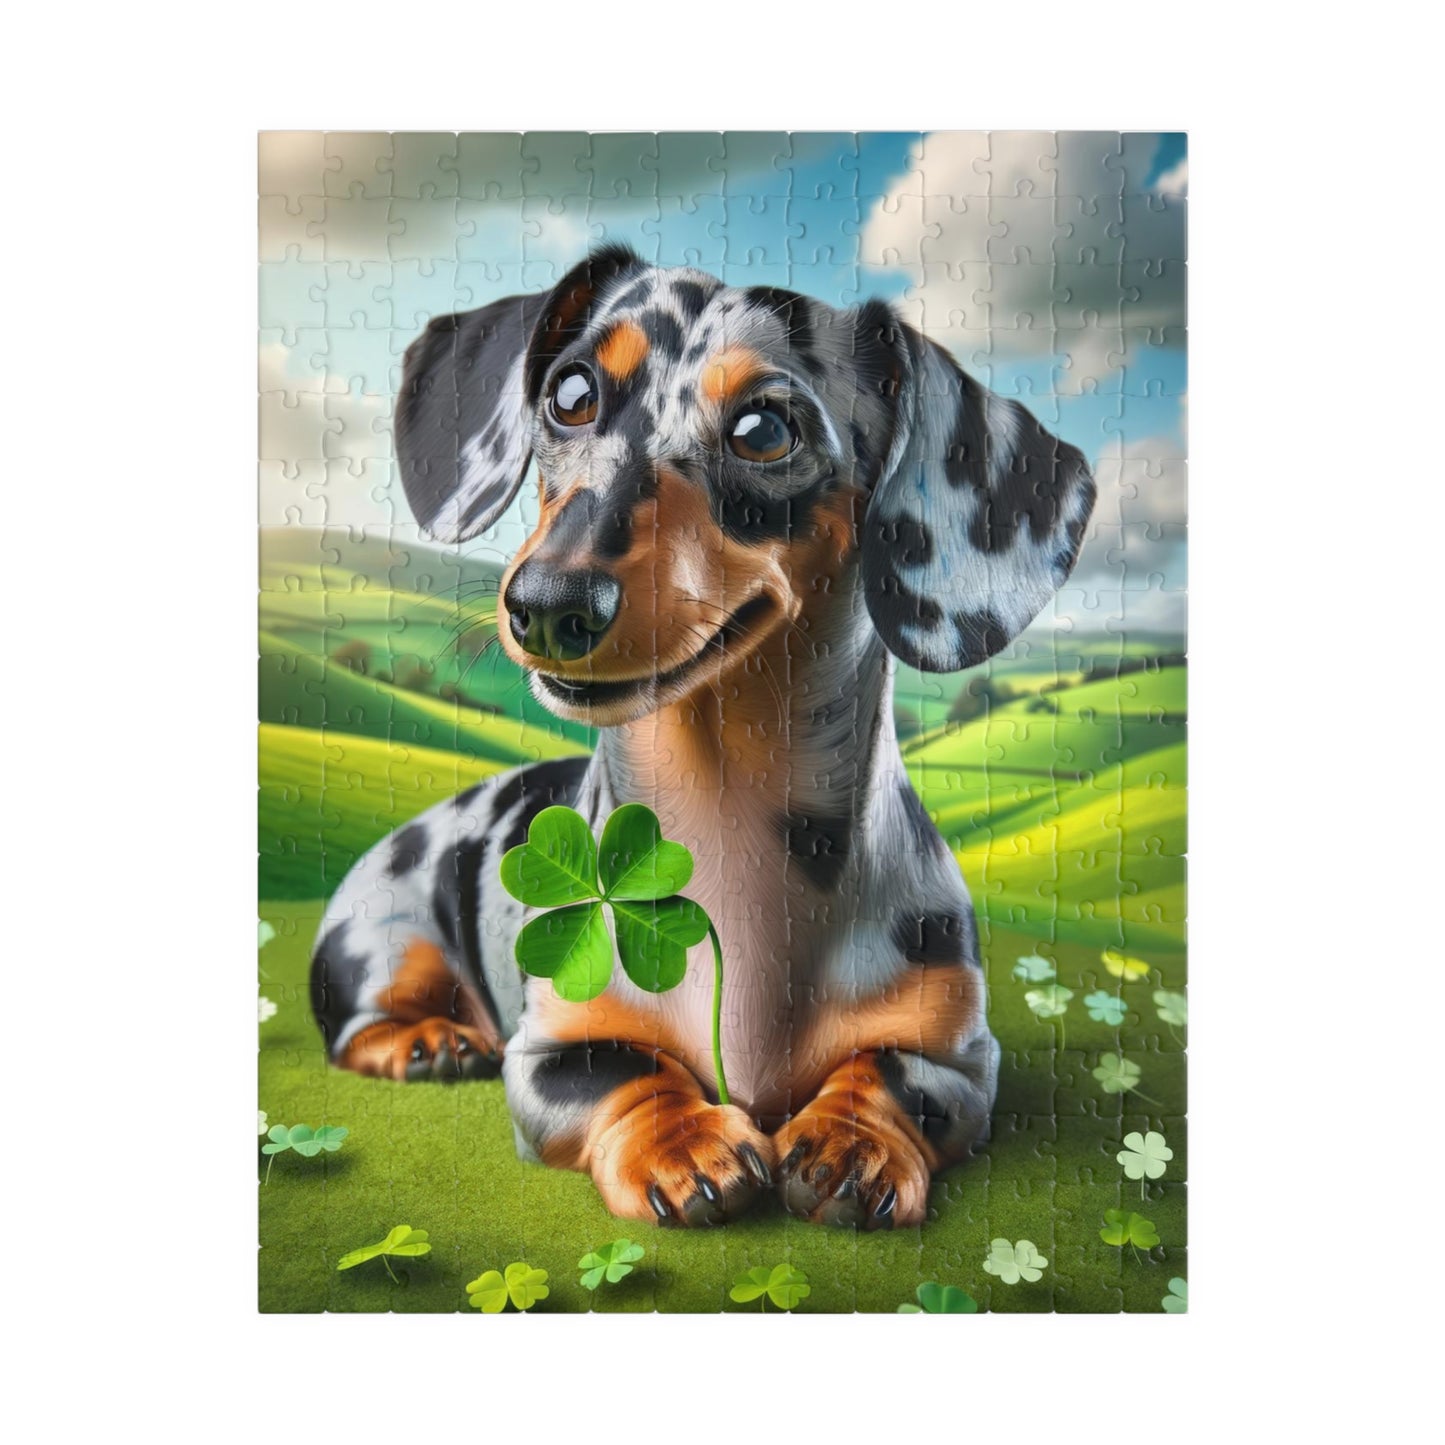 St Patrick's Day Lucky Charm Miniature Dachshund Jigsaw Puzzle -  Blue and Cream Dapple Mini Doxie 110, 252, 520 or 1014 Pieces